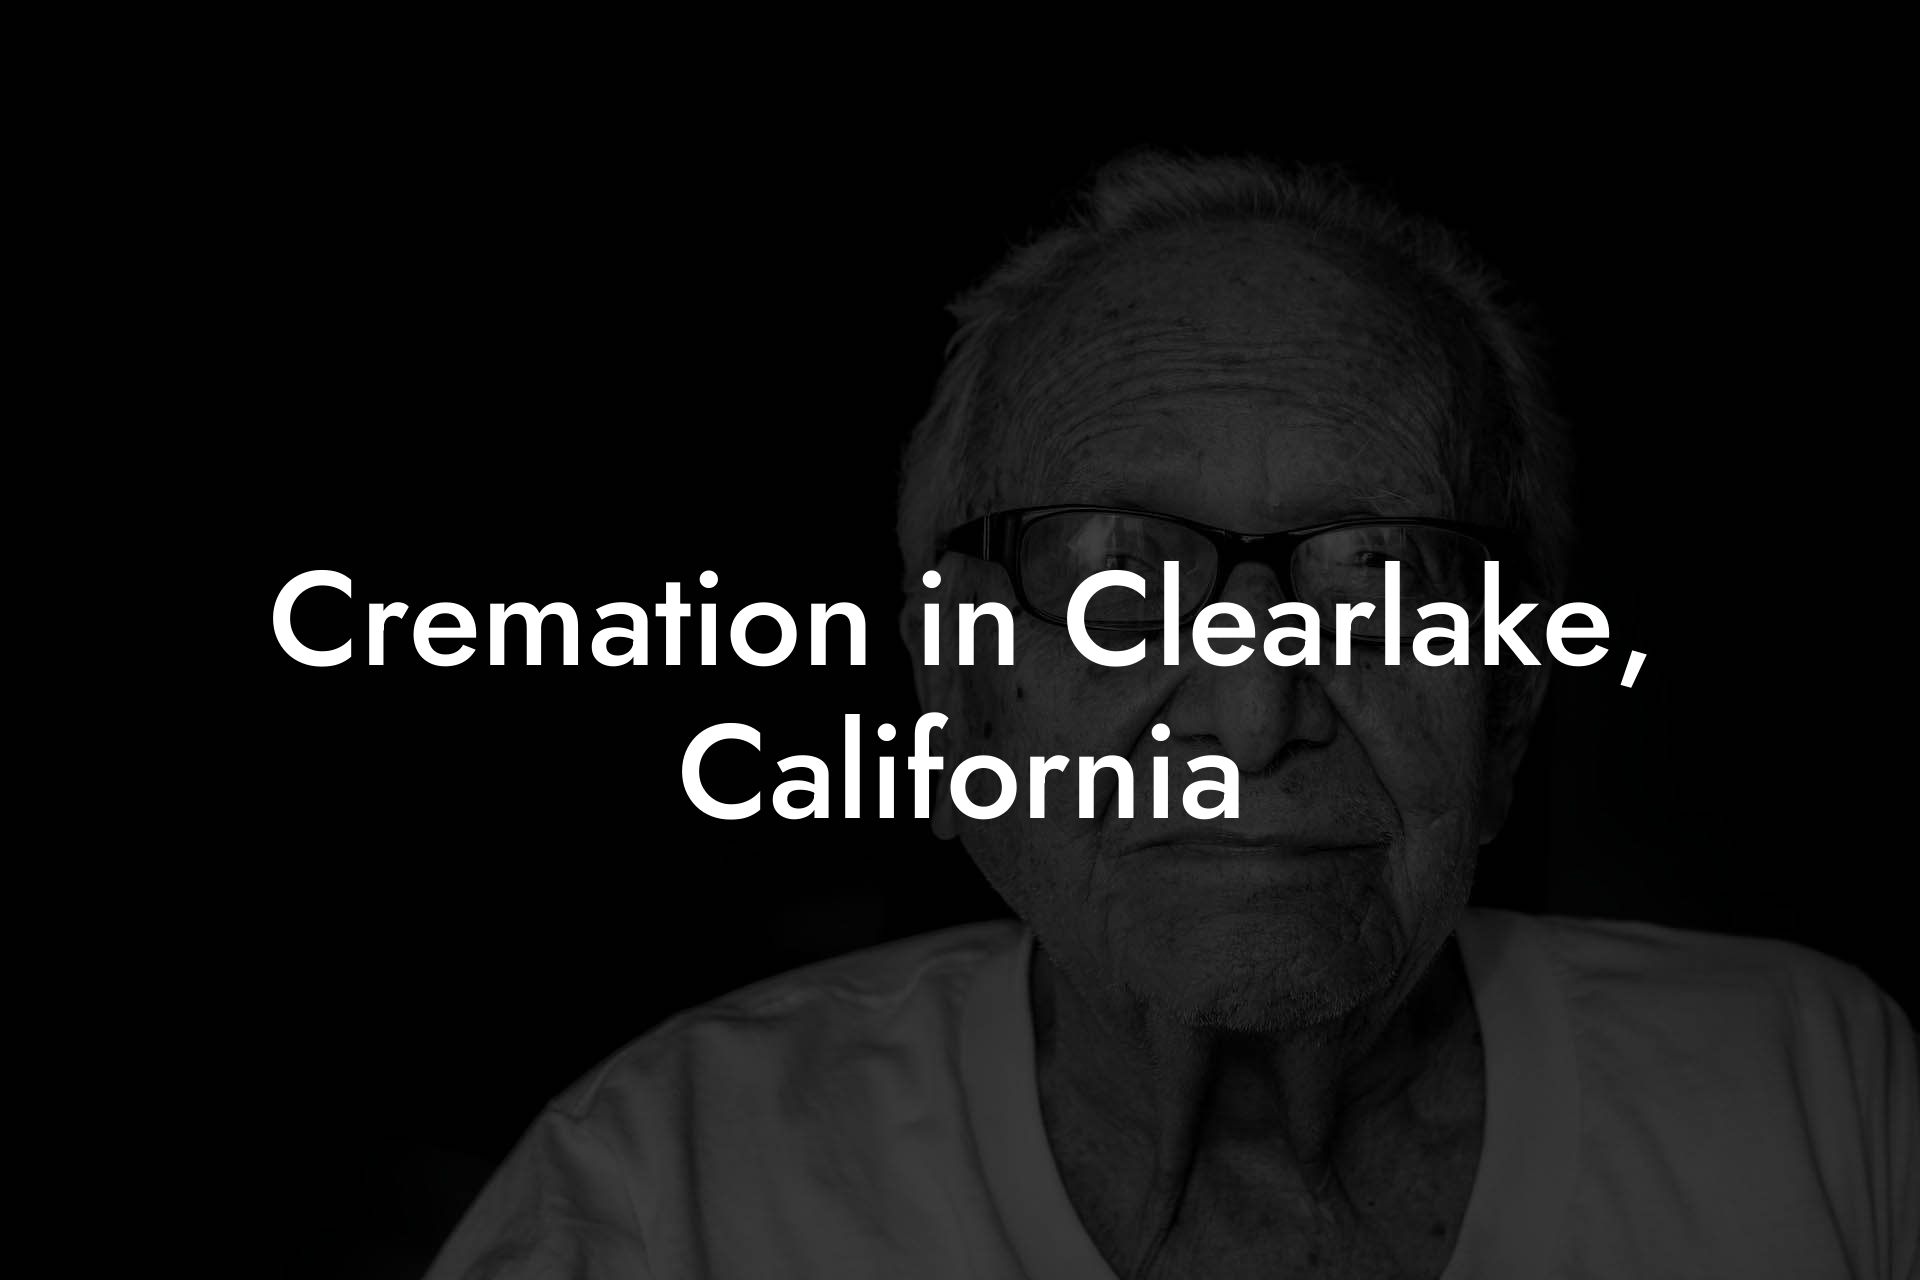 Cremation in Clearlake, California